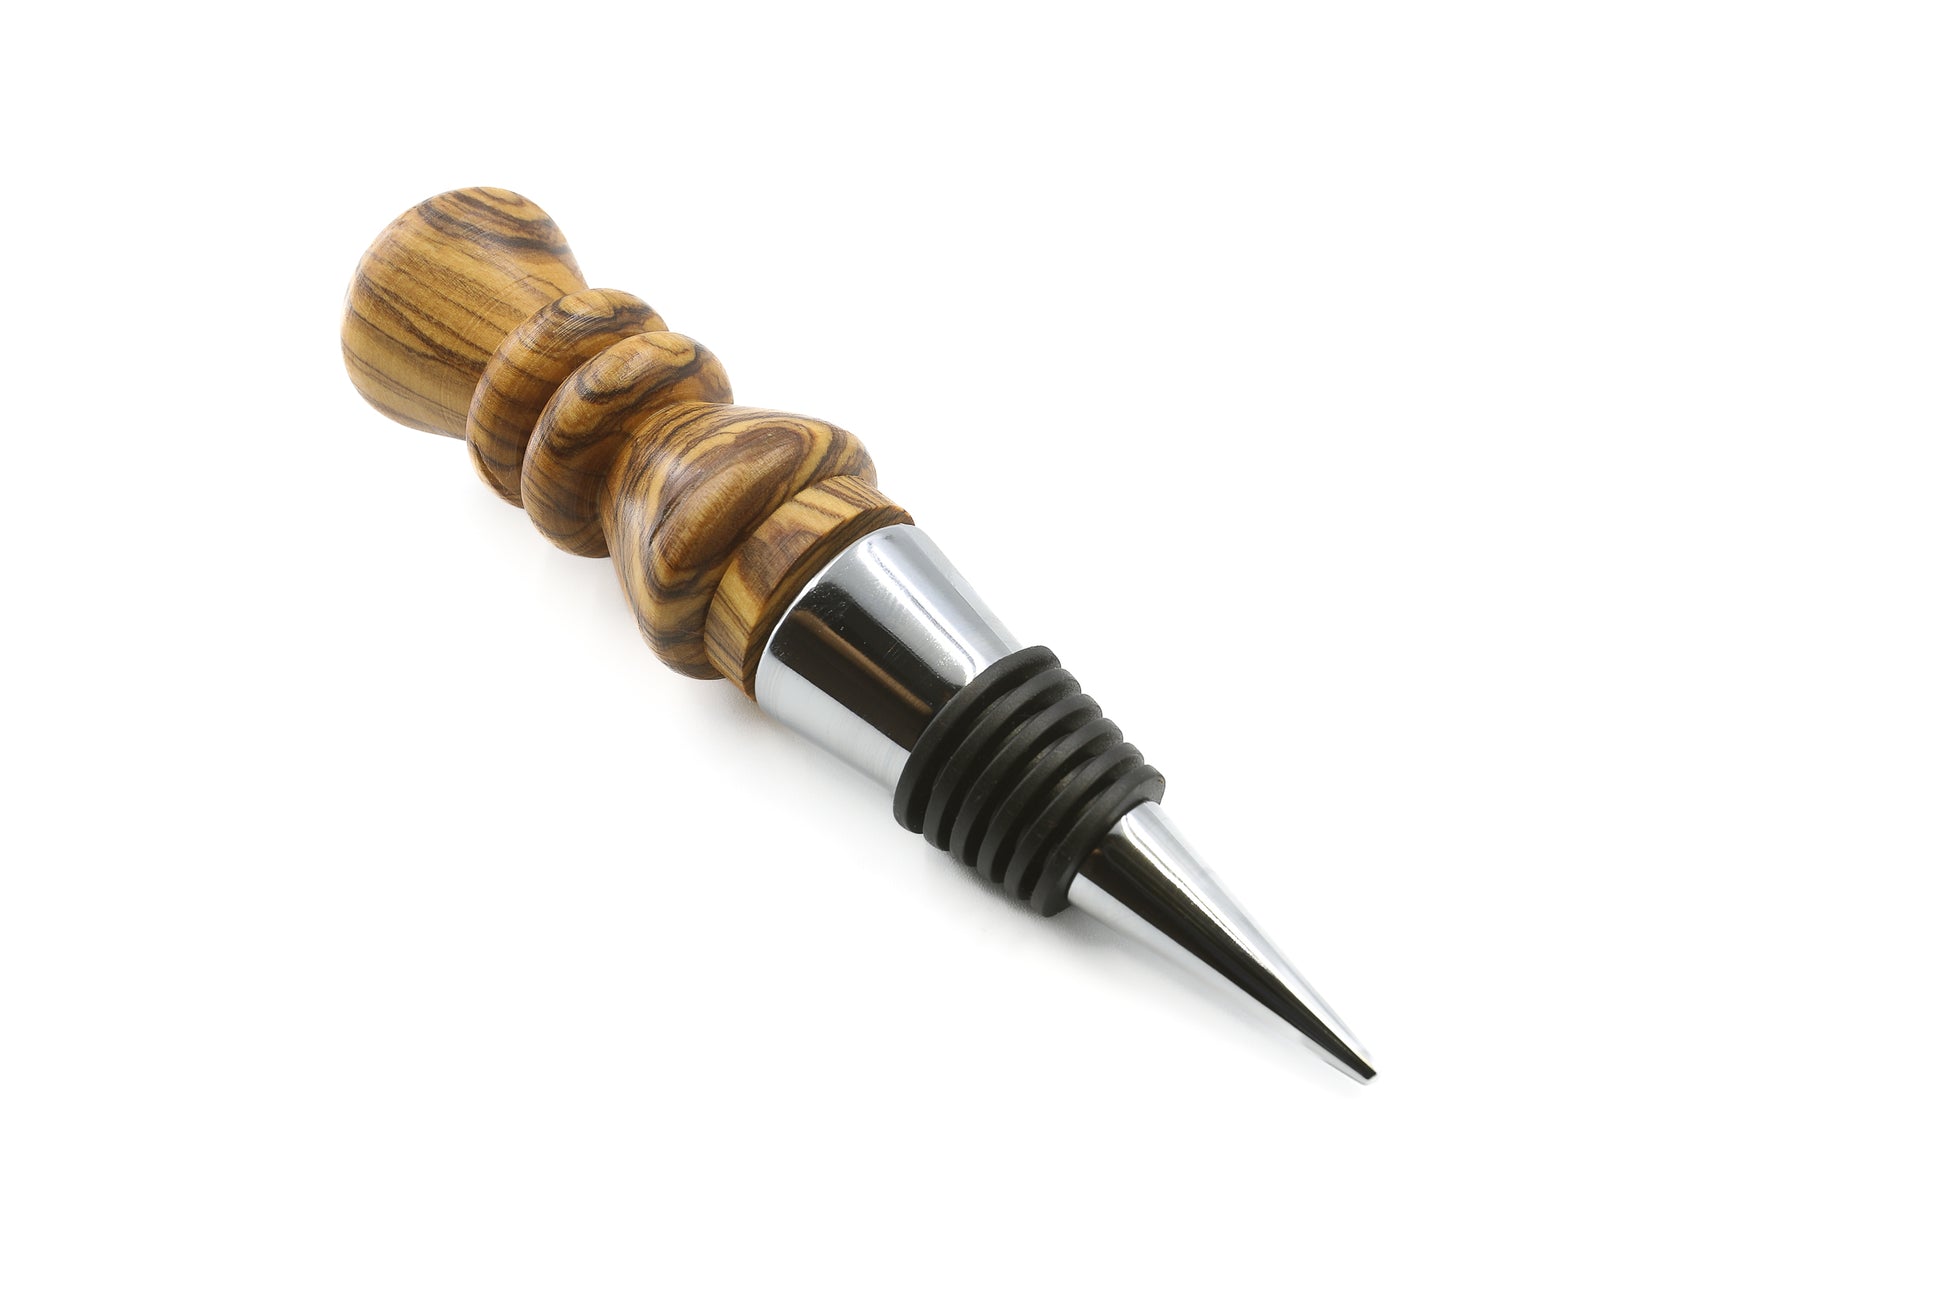 Unique bottle stopper made from premium olive wood